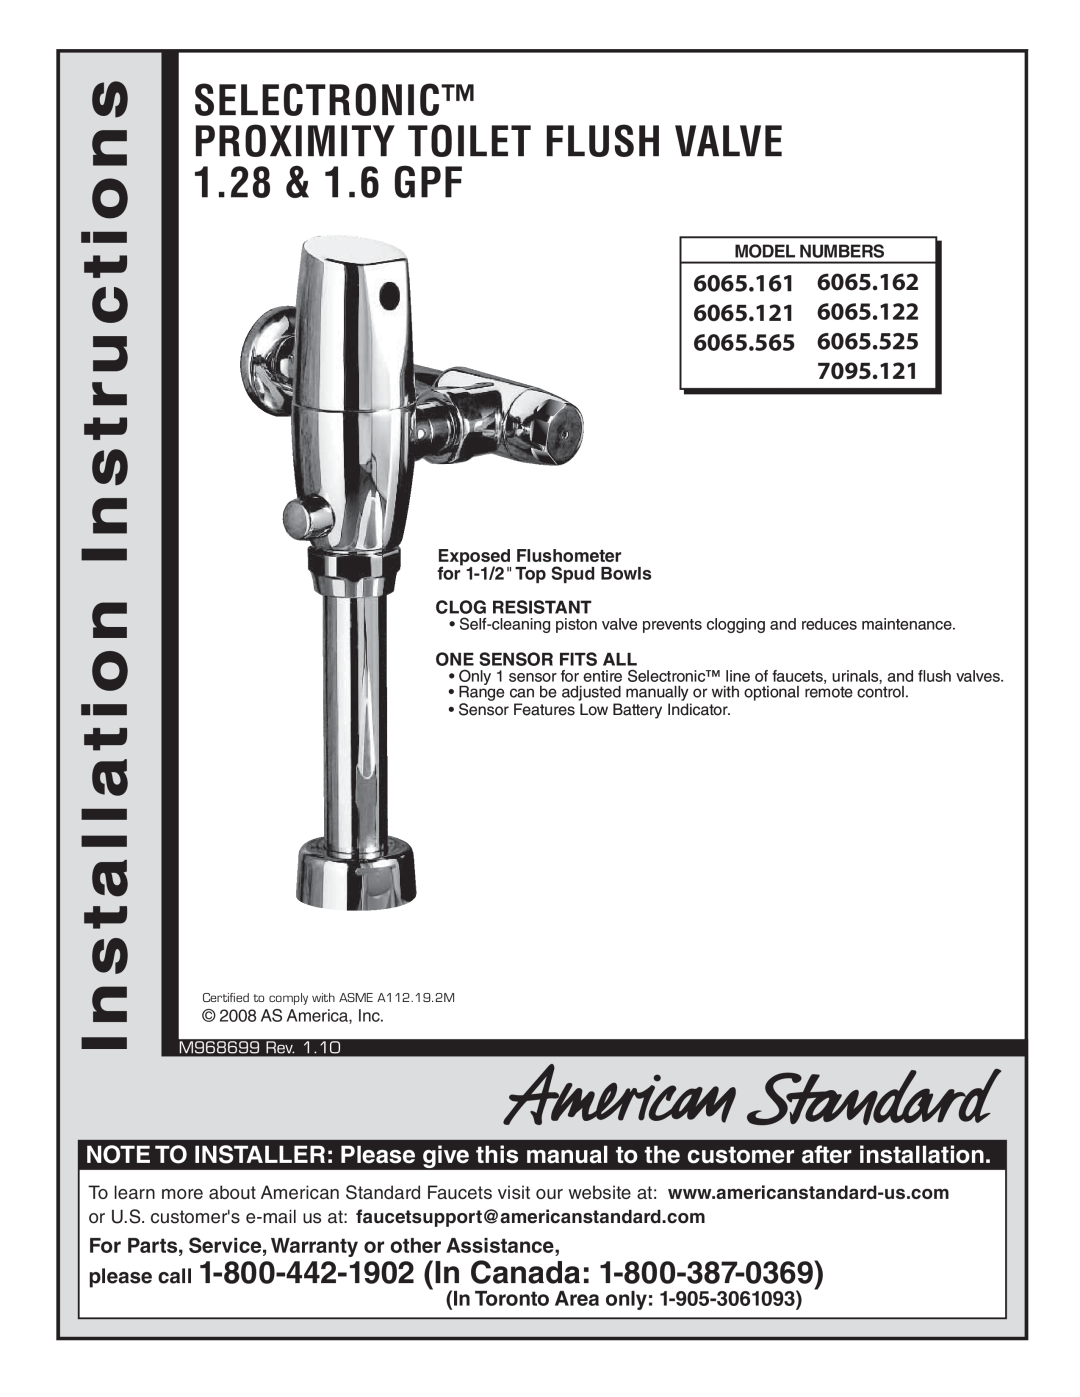 American Standard 6065.565 installation instructions For Parts, Service, Warranty or other Assistance, InTorontoArea onlly 